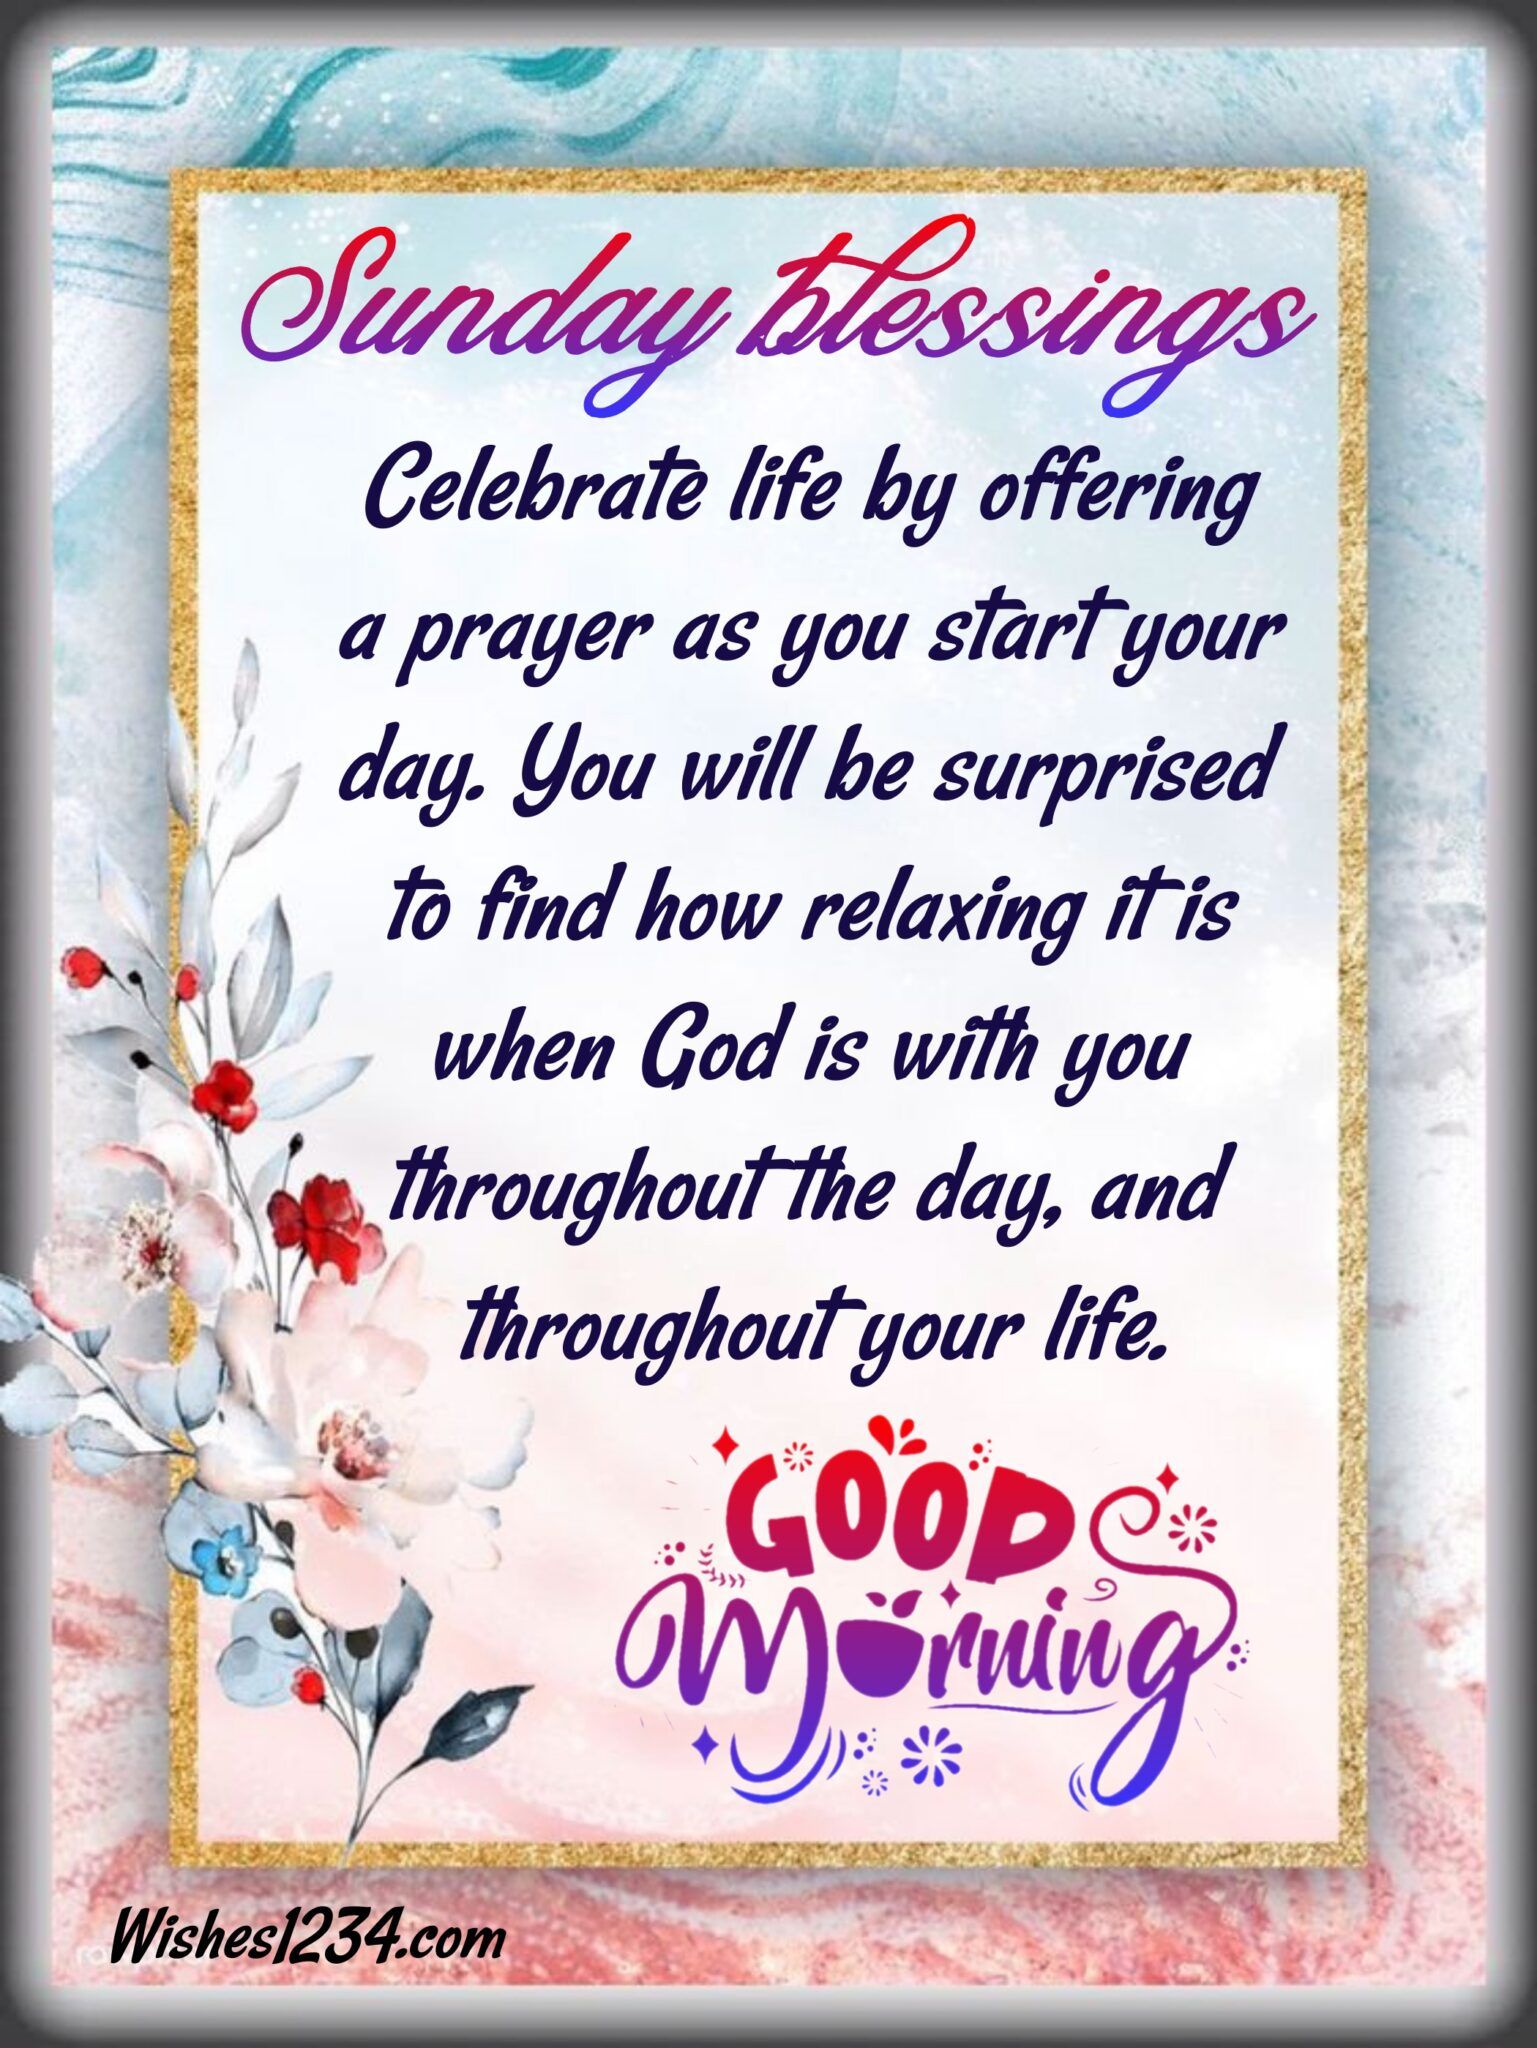 150+ Sunday blessings quotes, ,s, and short prayers HD Wallpaper